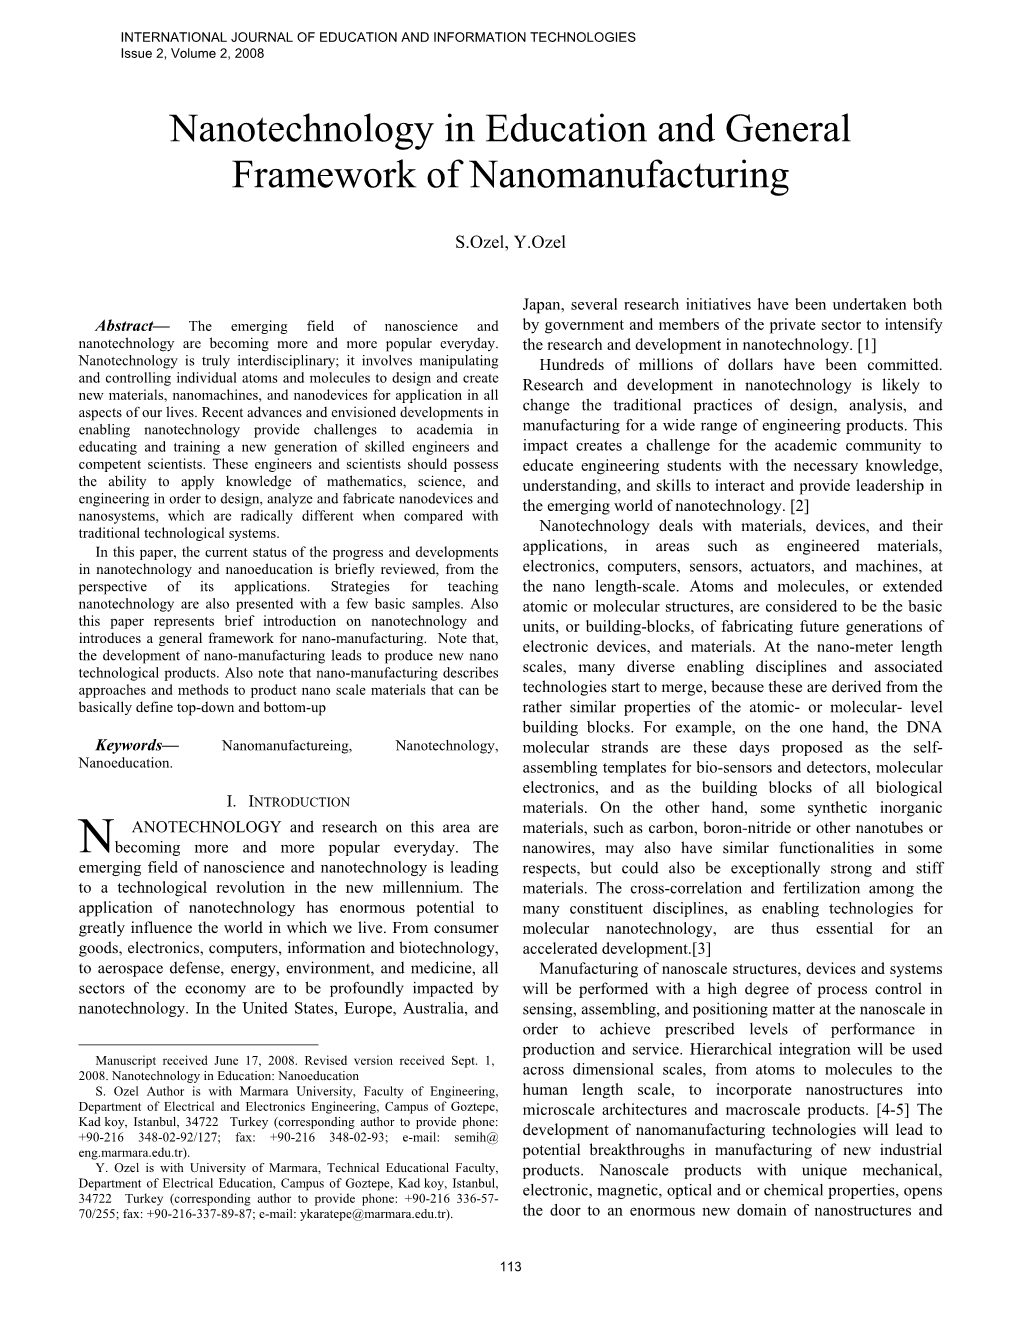 Nanotechnology in Education and General Framework of Nanomanufacturing